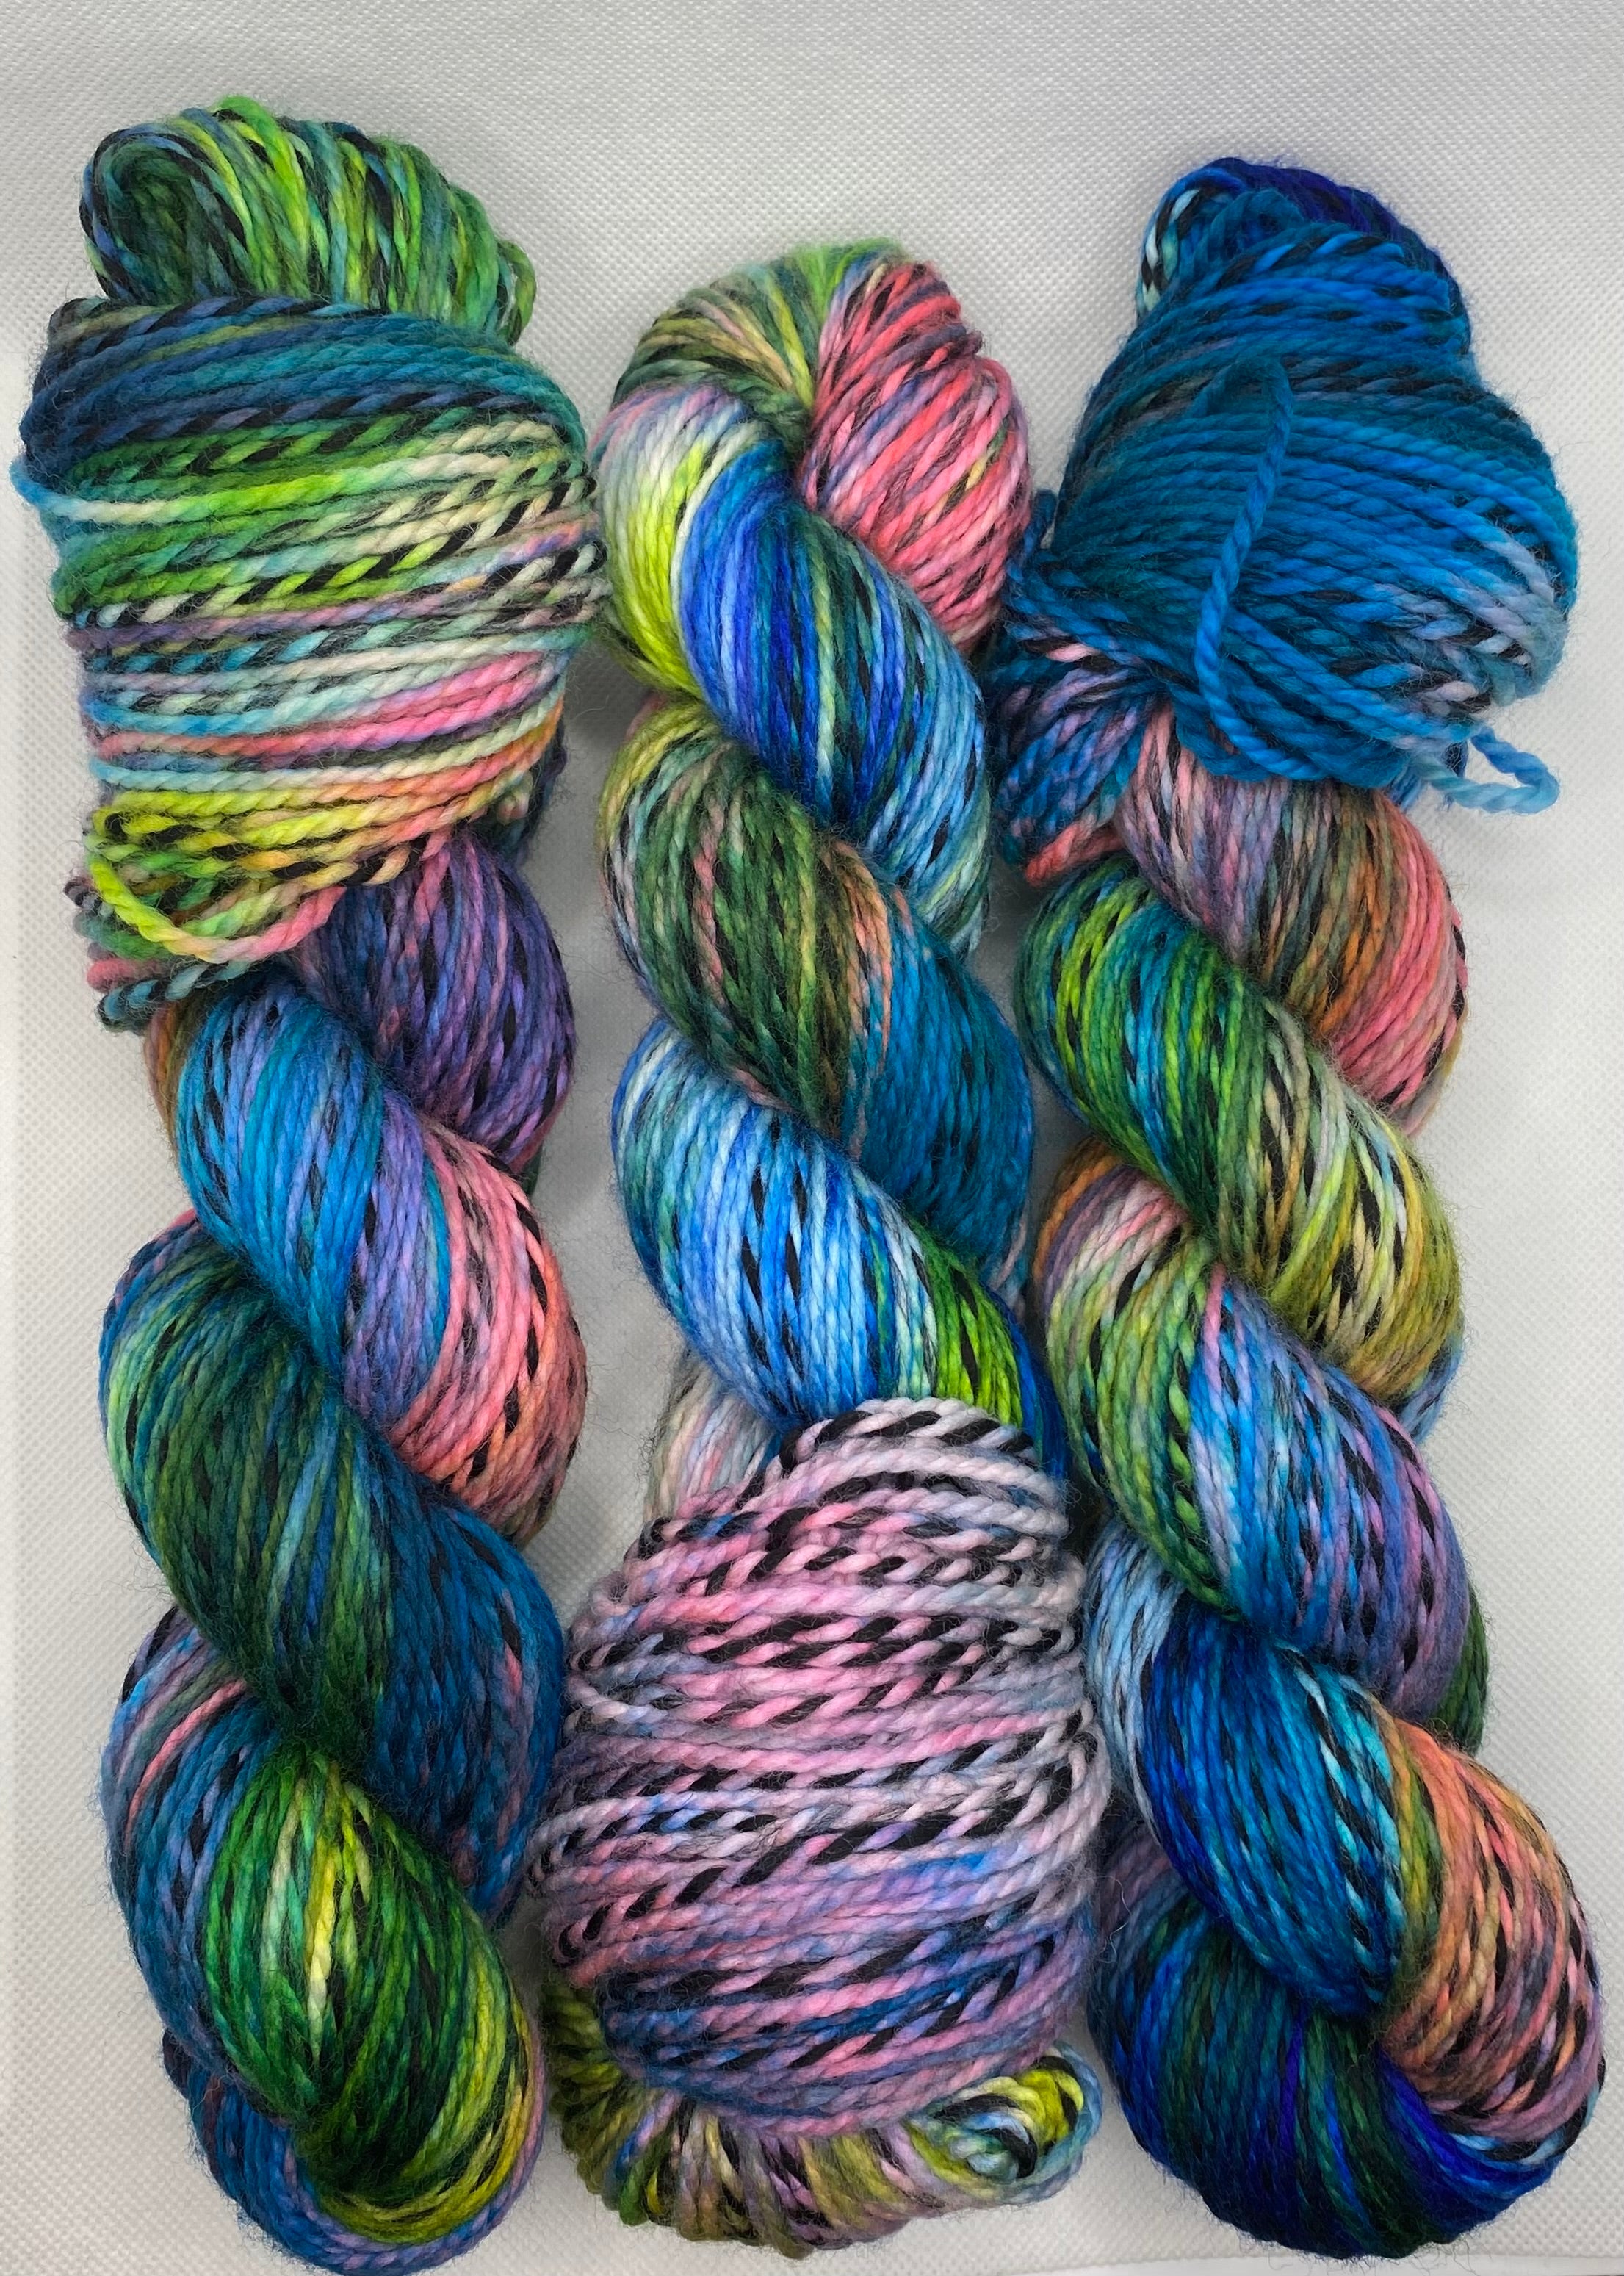 “Blue, Pink and Green” One-Of-a-Kind Zebra DK Hand Dyed Yarn